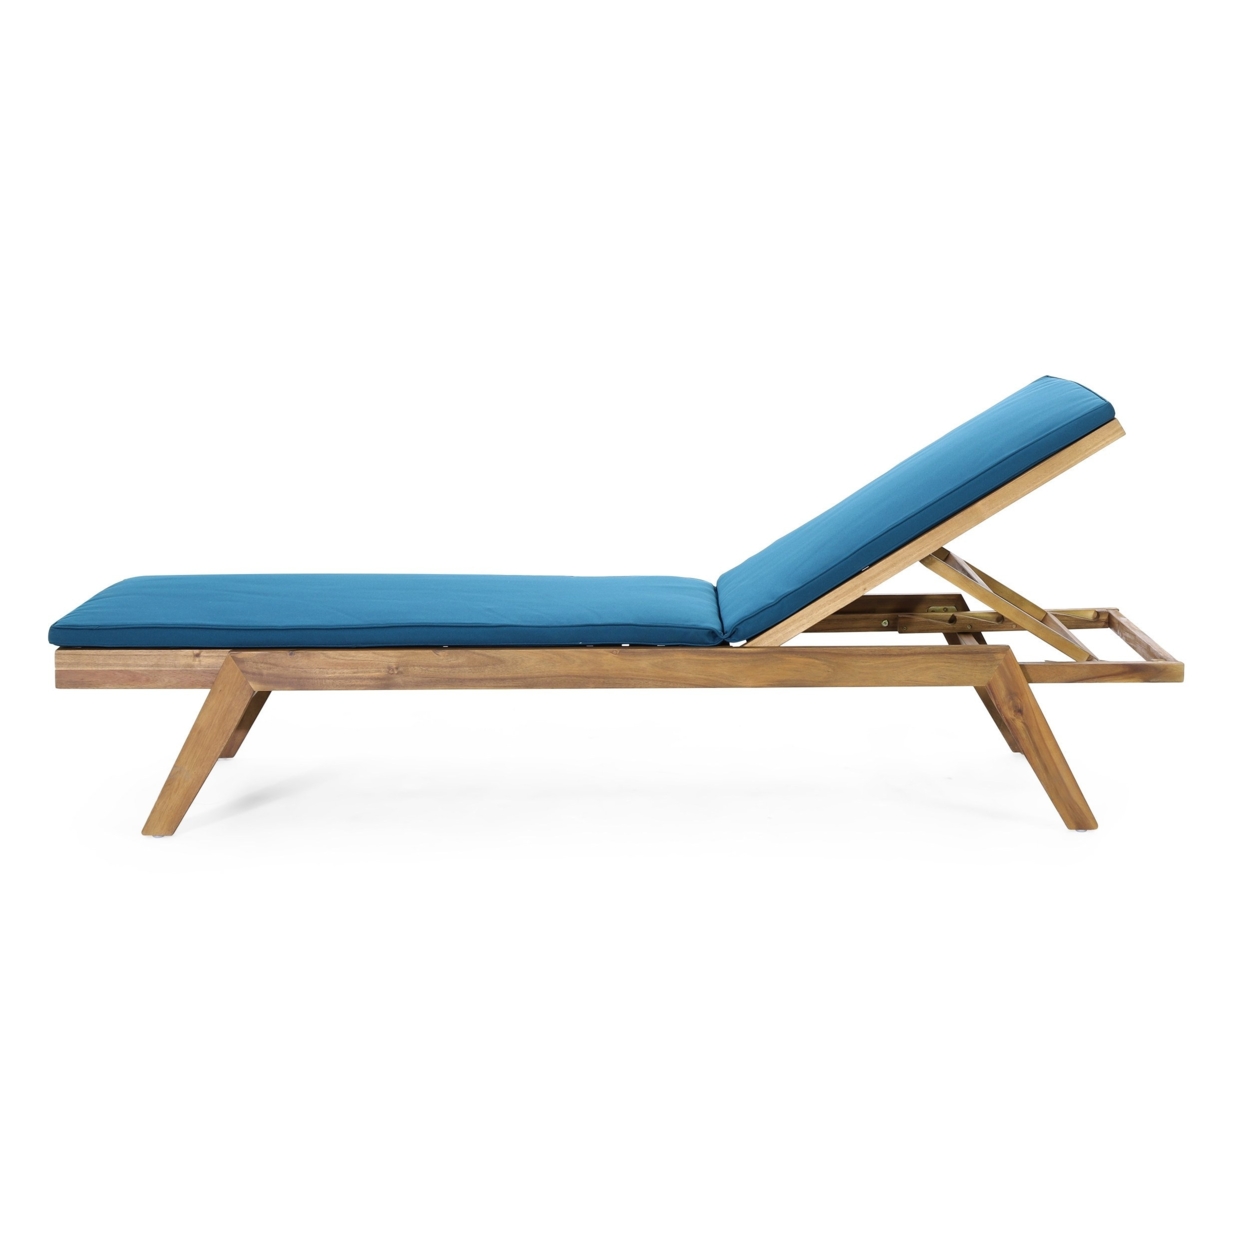 Larimore Outdoor Acacia Wood Chaise Lounge With Water Resistant Cushions, Set Of 2 - Teak/blue